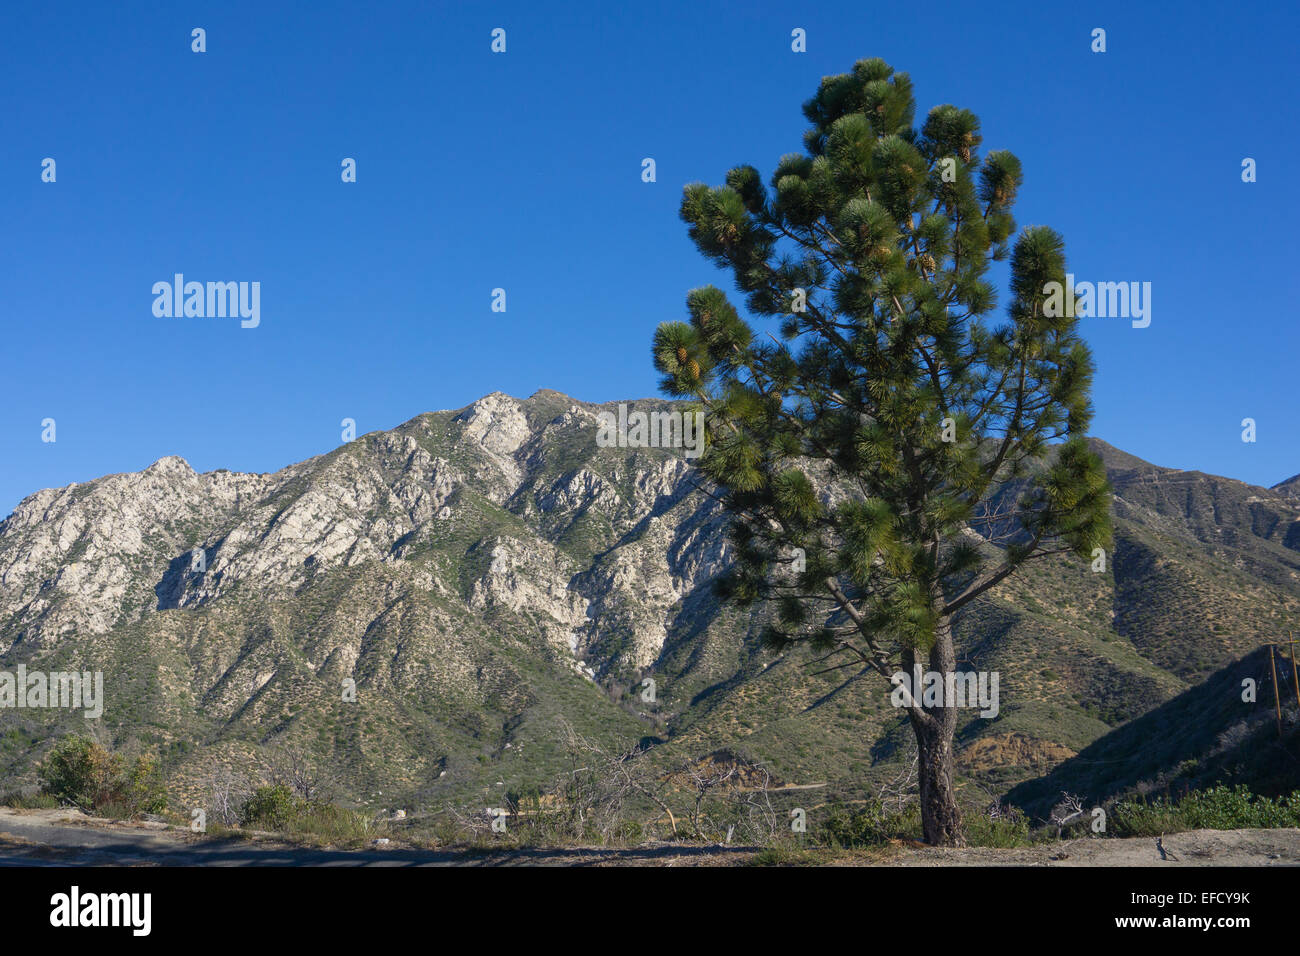 Pine tree overlooks a deep valley in the San Gabriel Mountains above Los Angeles, California. Stock Photo